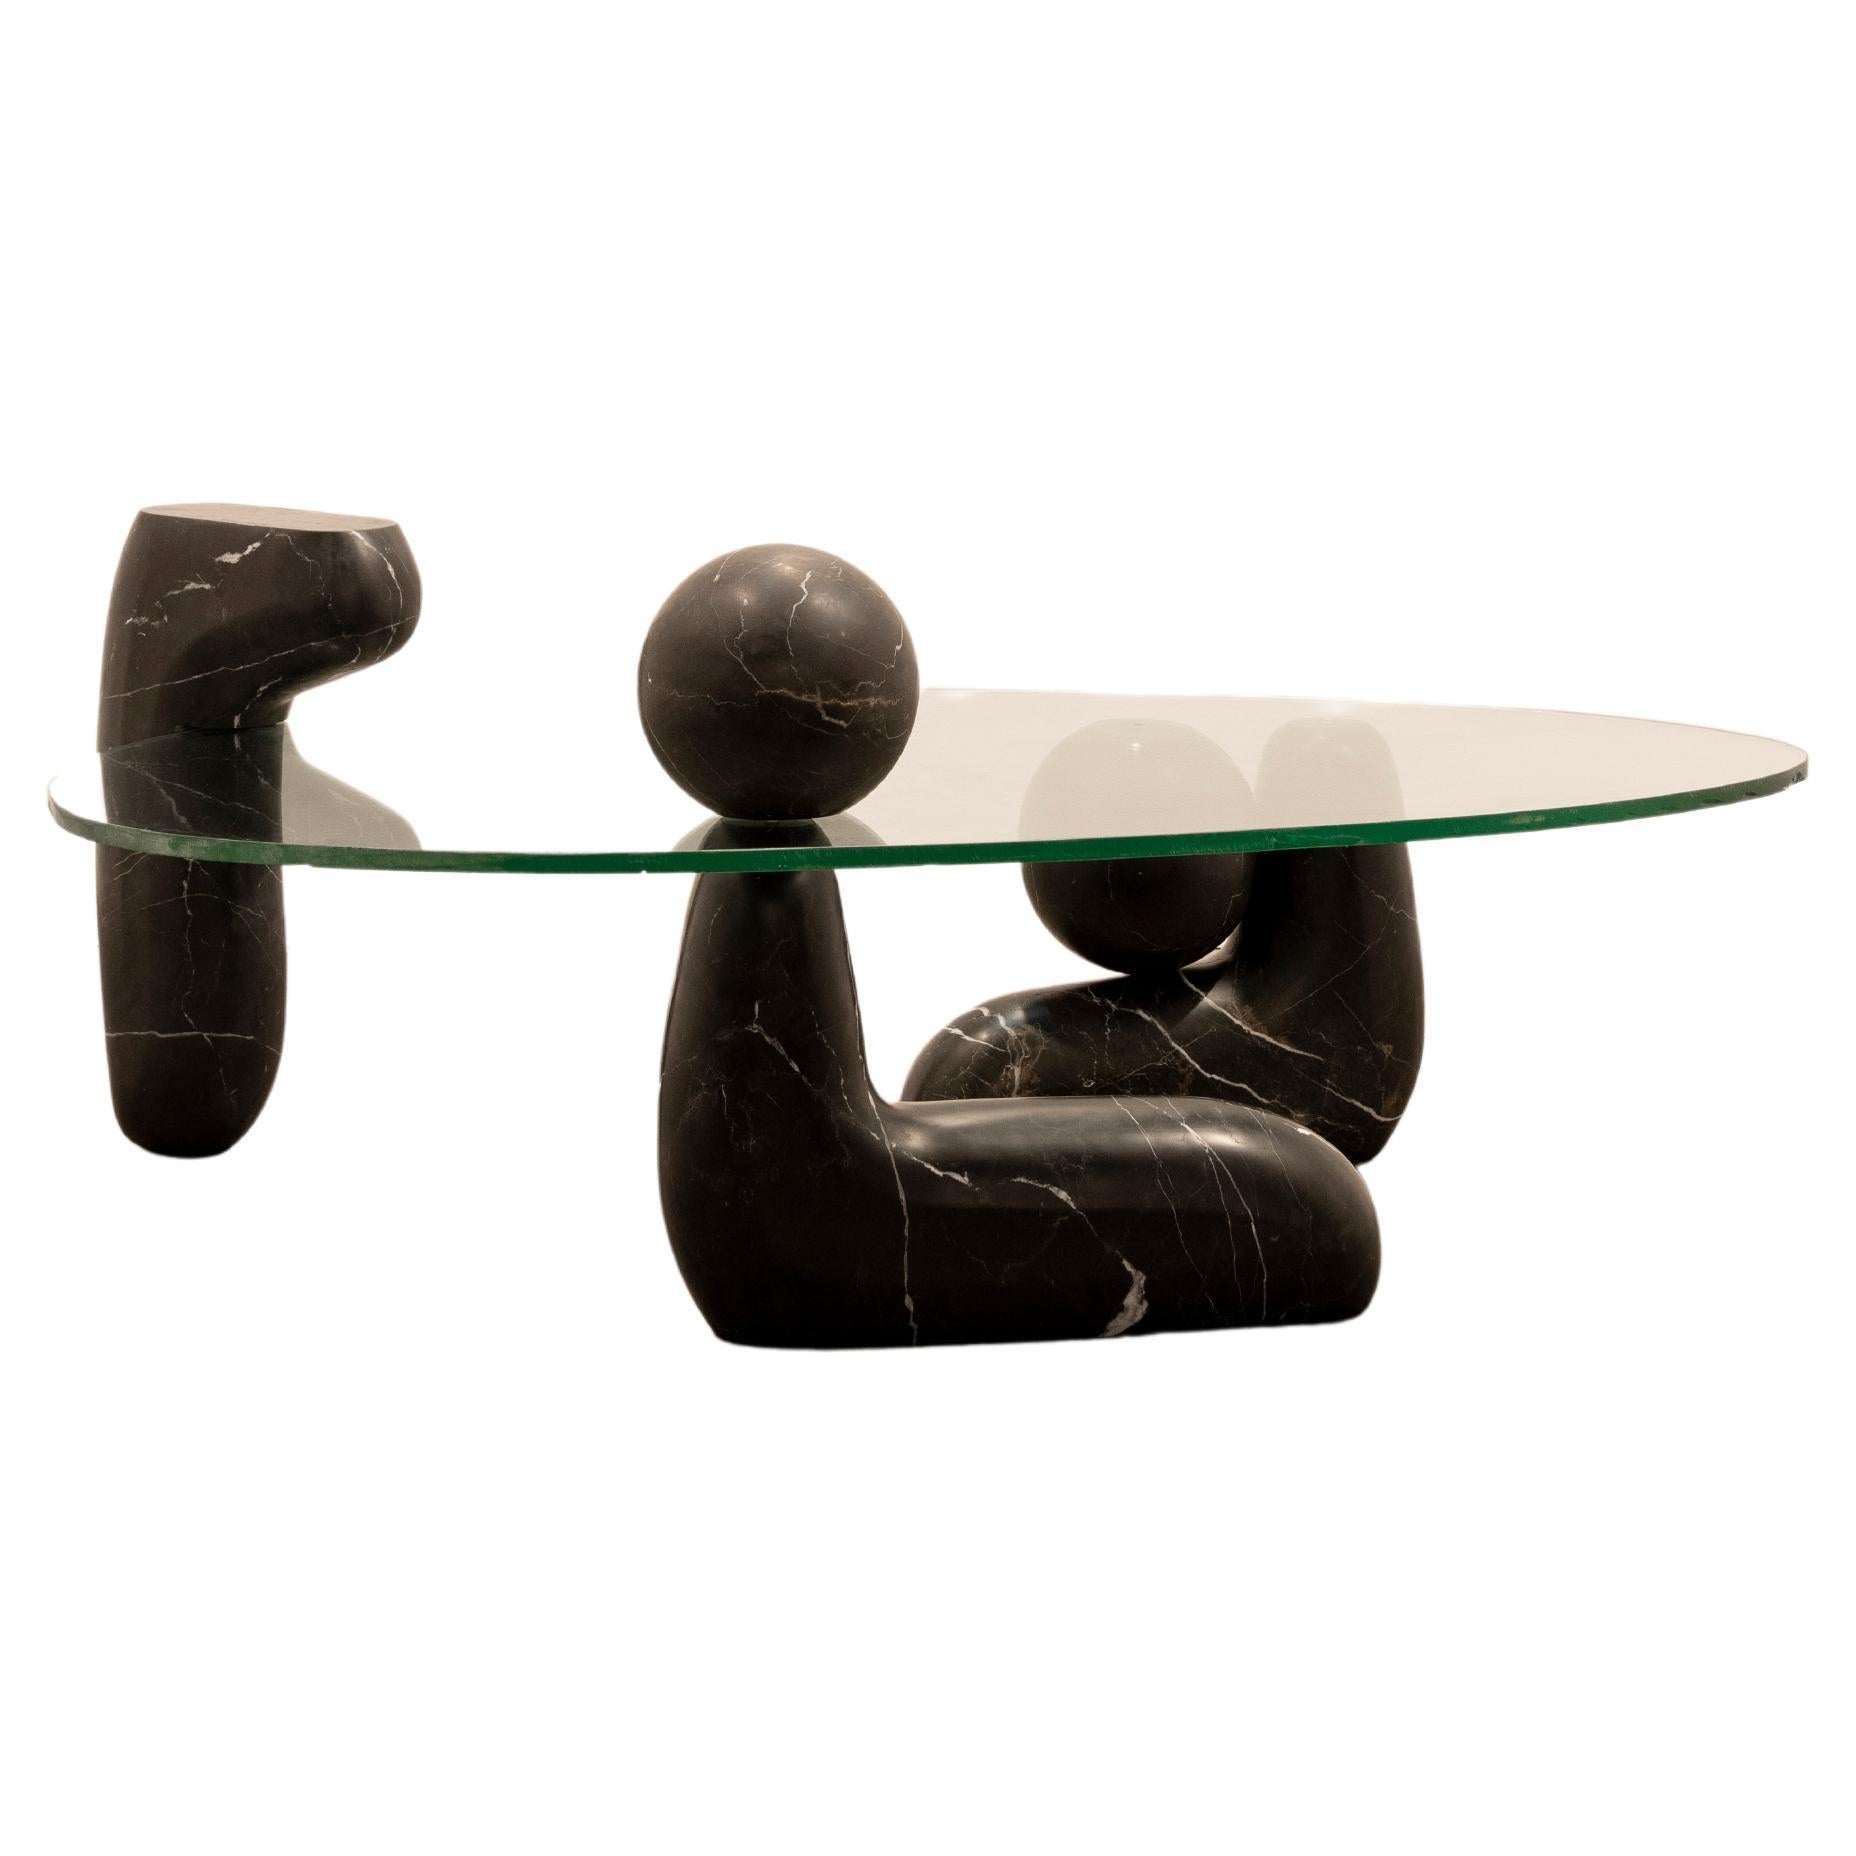 ARIA BALANCE TABLE, by Rebeca Cors